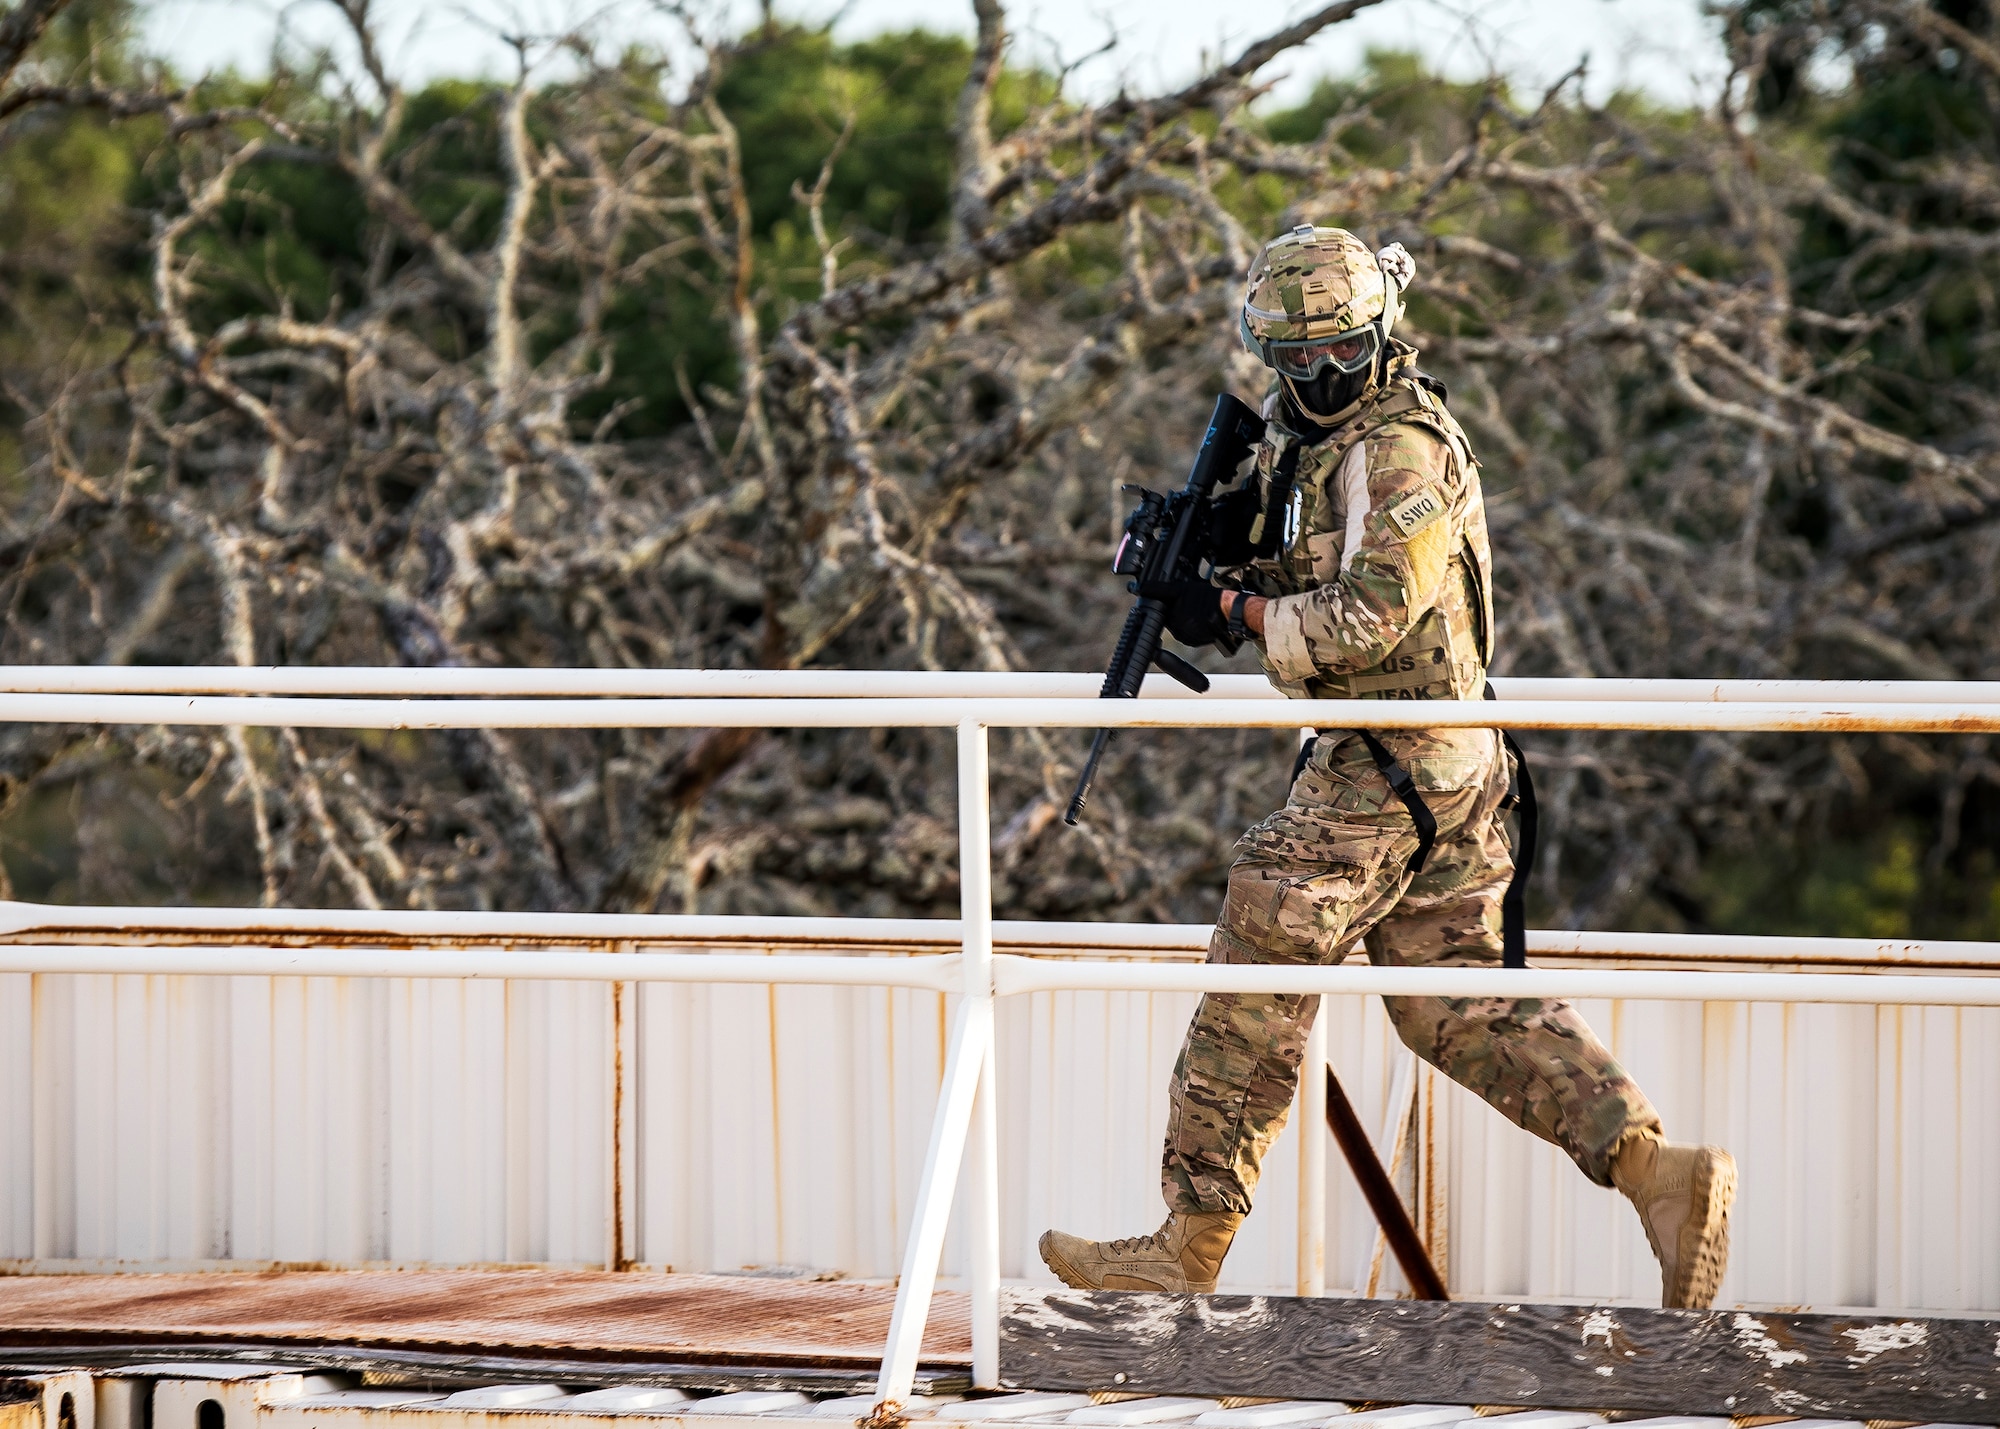 A Staff Weather Officer from the 3d Weather runs to another vantage point during a certification field exercise (CFX), July 29, 2019, at Camp Bowie Training Center, Texas. The CFX was designed to evaluate the squadron’s overall tactical ability and readiness to provide the U.S. Army with full spectrum environmental support to the Joint Task Force (JTF) fight. The CFX immersed Airmen into all the aspects of what could come with a deployment such as force on force scenarios. (U.S. Air Force photo by Airman 1st Class Eugene Oliver)